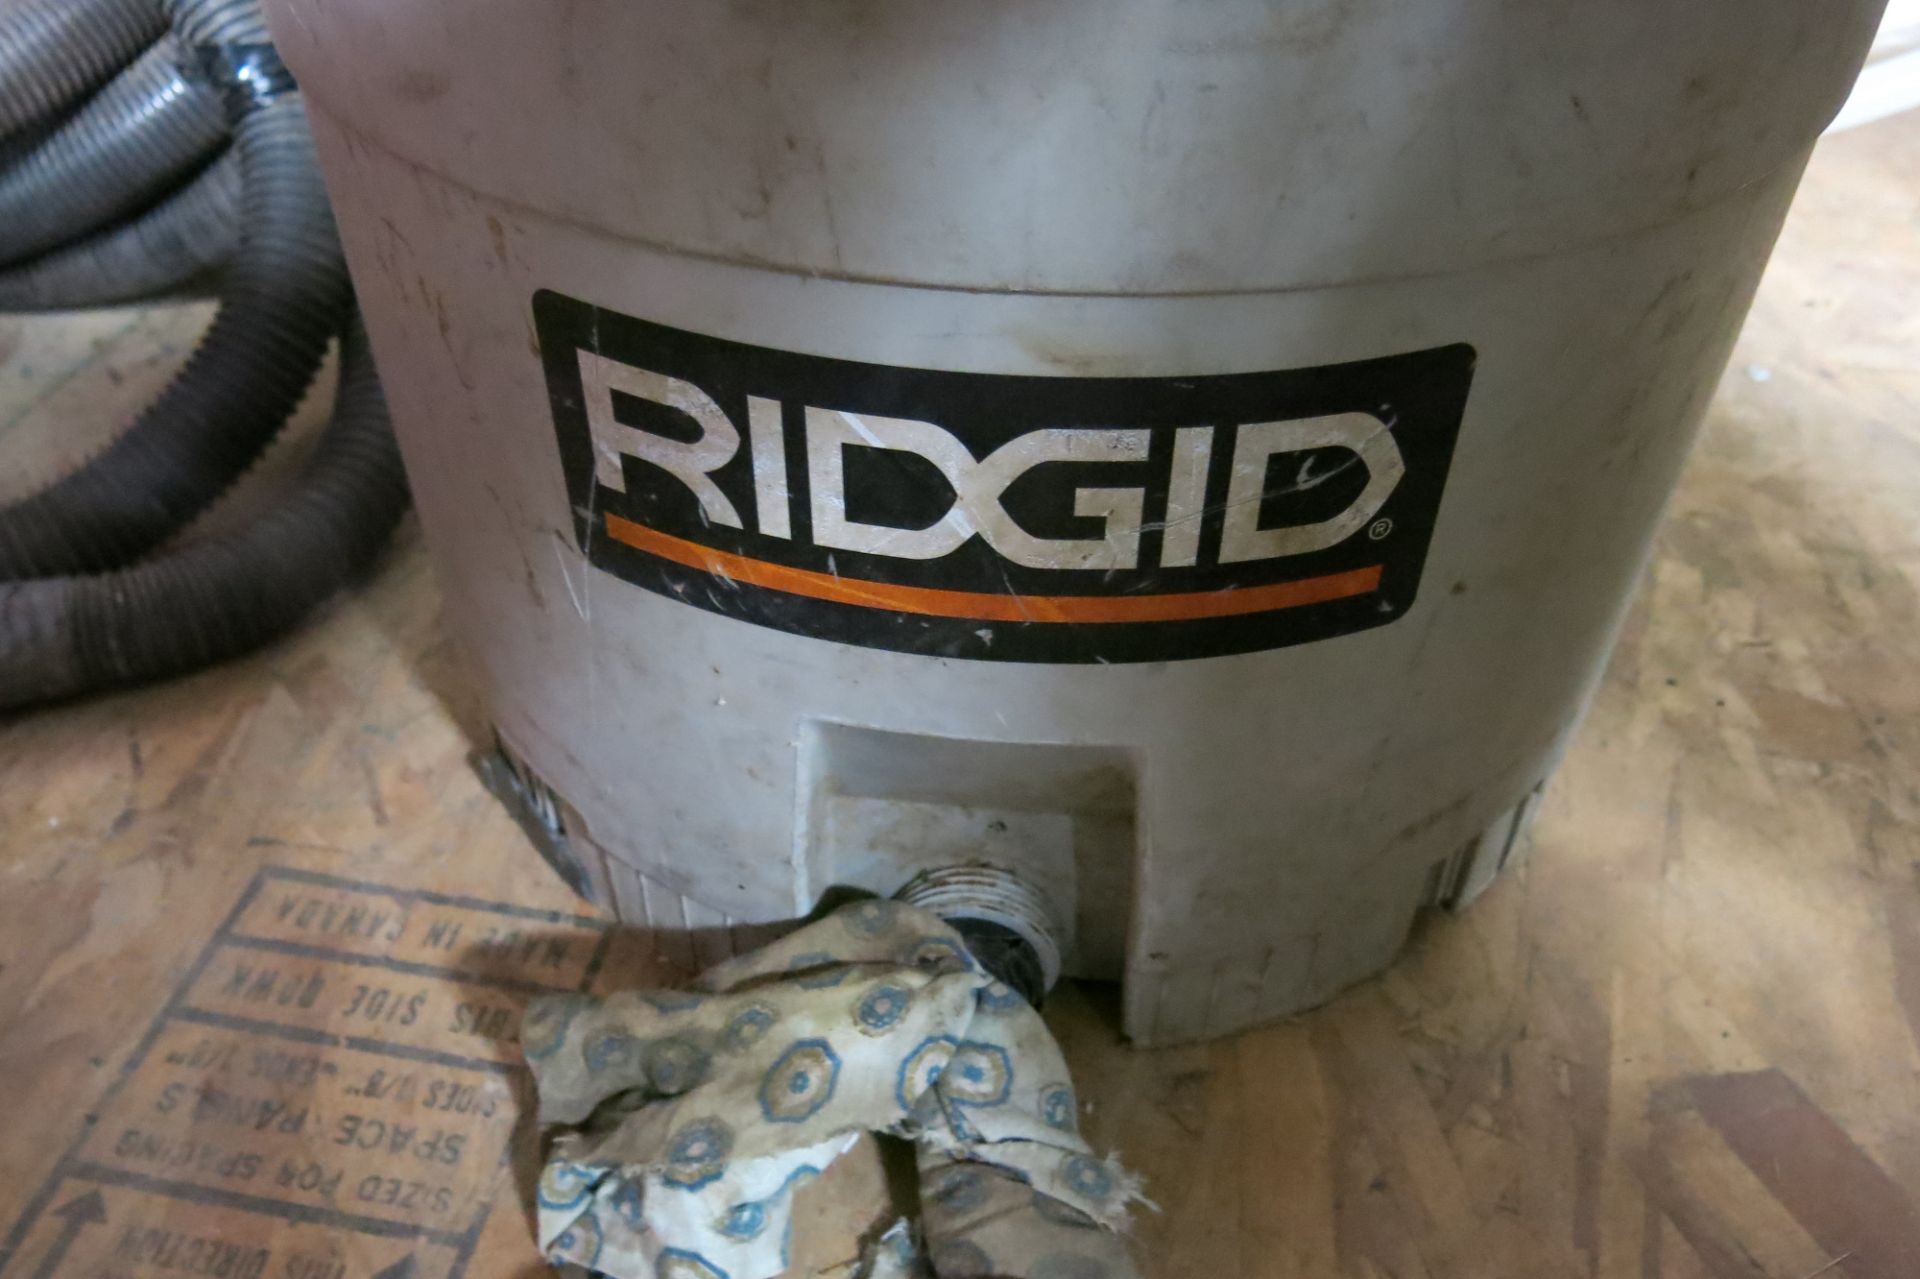 RIDGID, 12 GALLON, 5 HP, WET/DRY VAC (LOCATED IN MISSISSAUGA) - Image 2 of 3